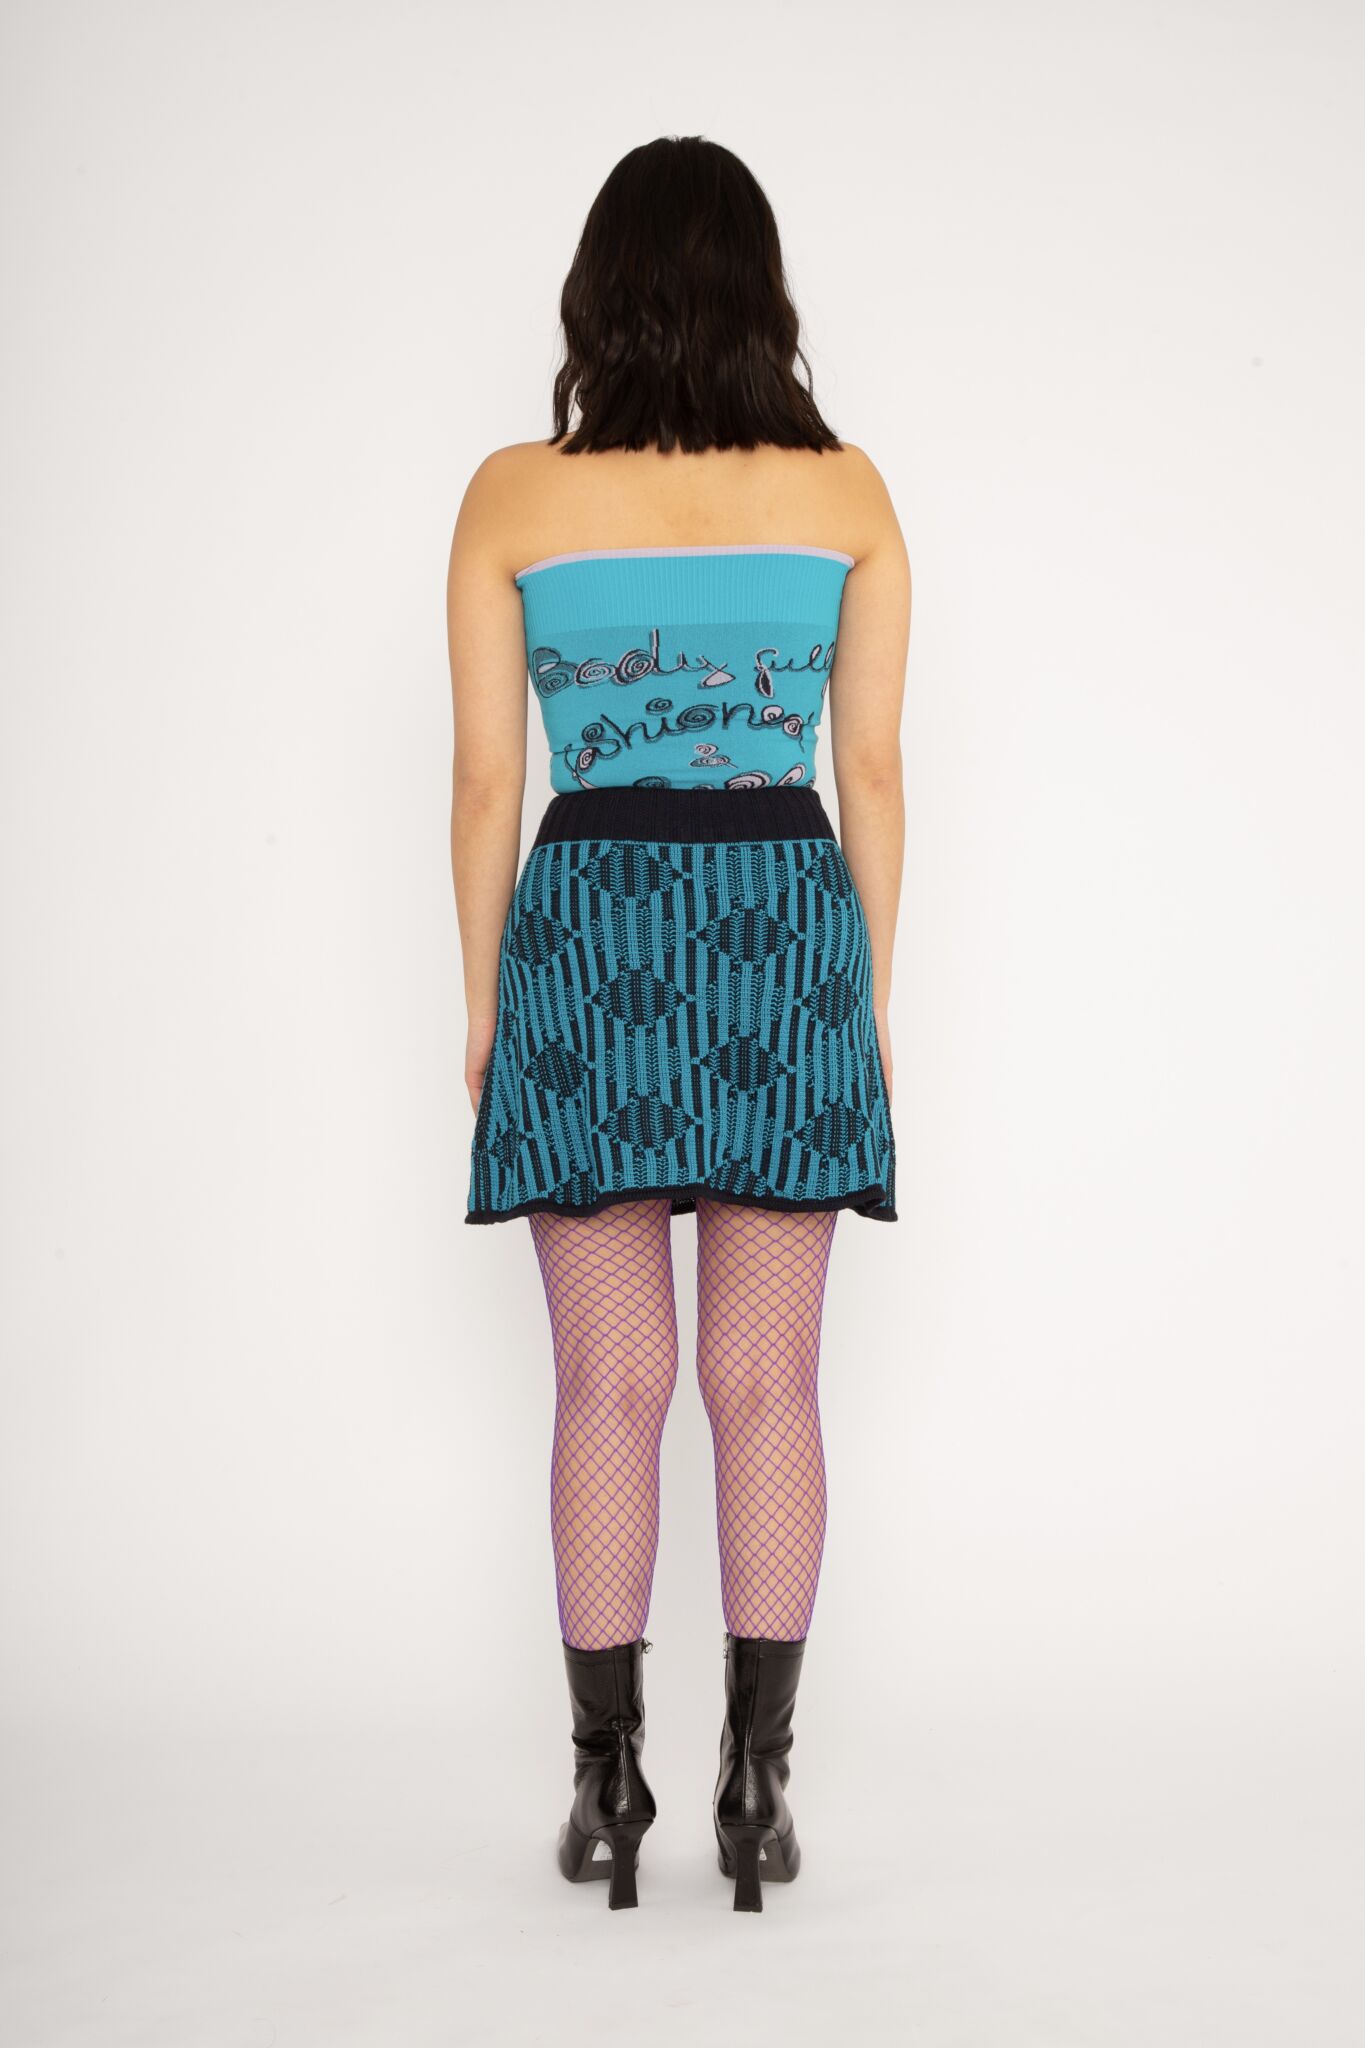 Mini Diamond Skirt in turquoise and navy is a knitted mini skirt in merino wool with checked diamonds. The textile is soft, stretchy and lightweight. The skirt has an A-line shape and a flexible waistband in rib that adapts to the body. The Mini Diamond Skirt is available in 3 different sizes.